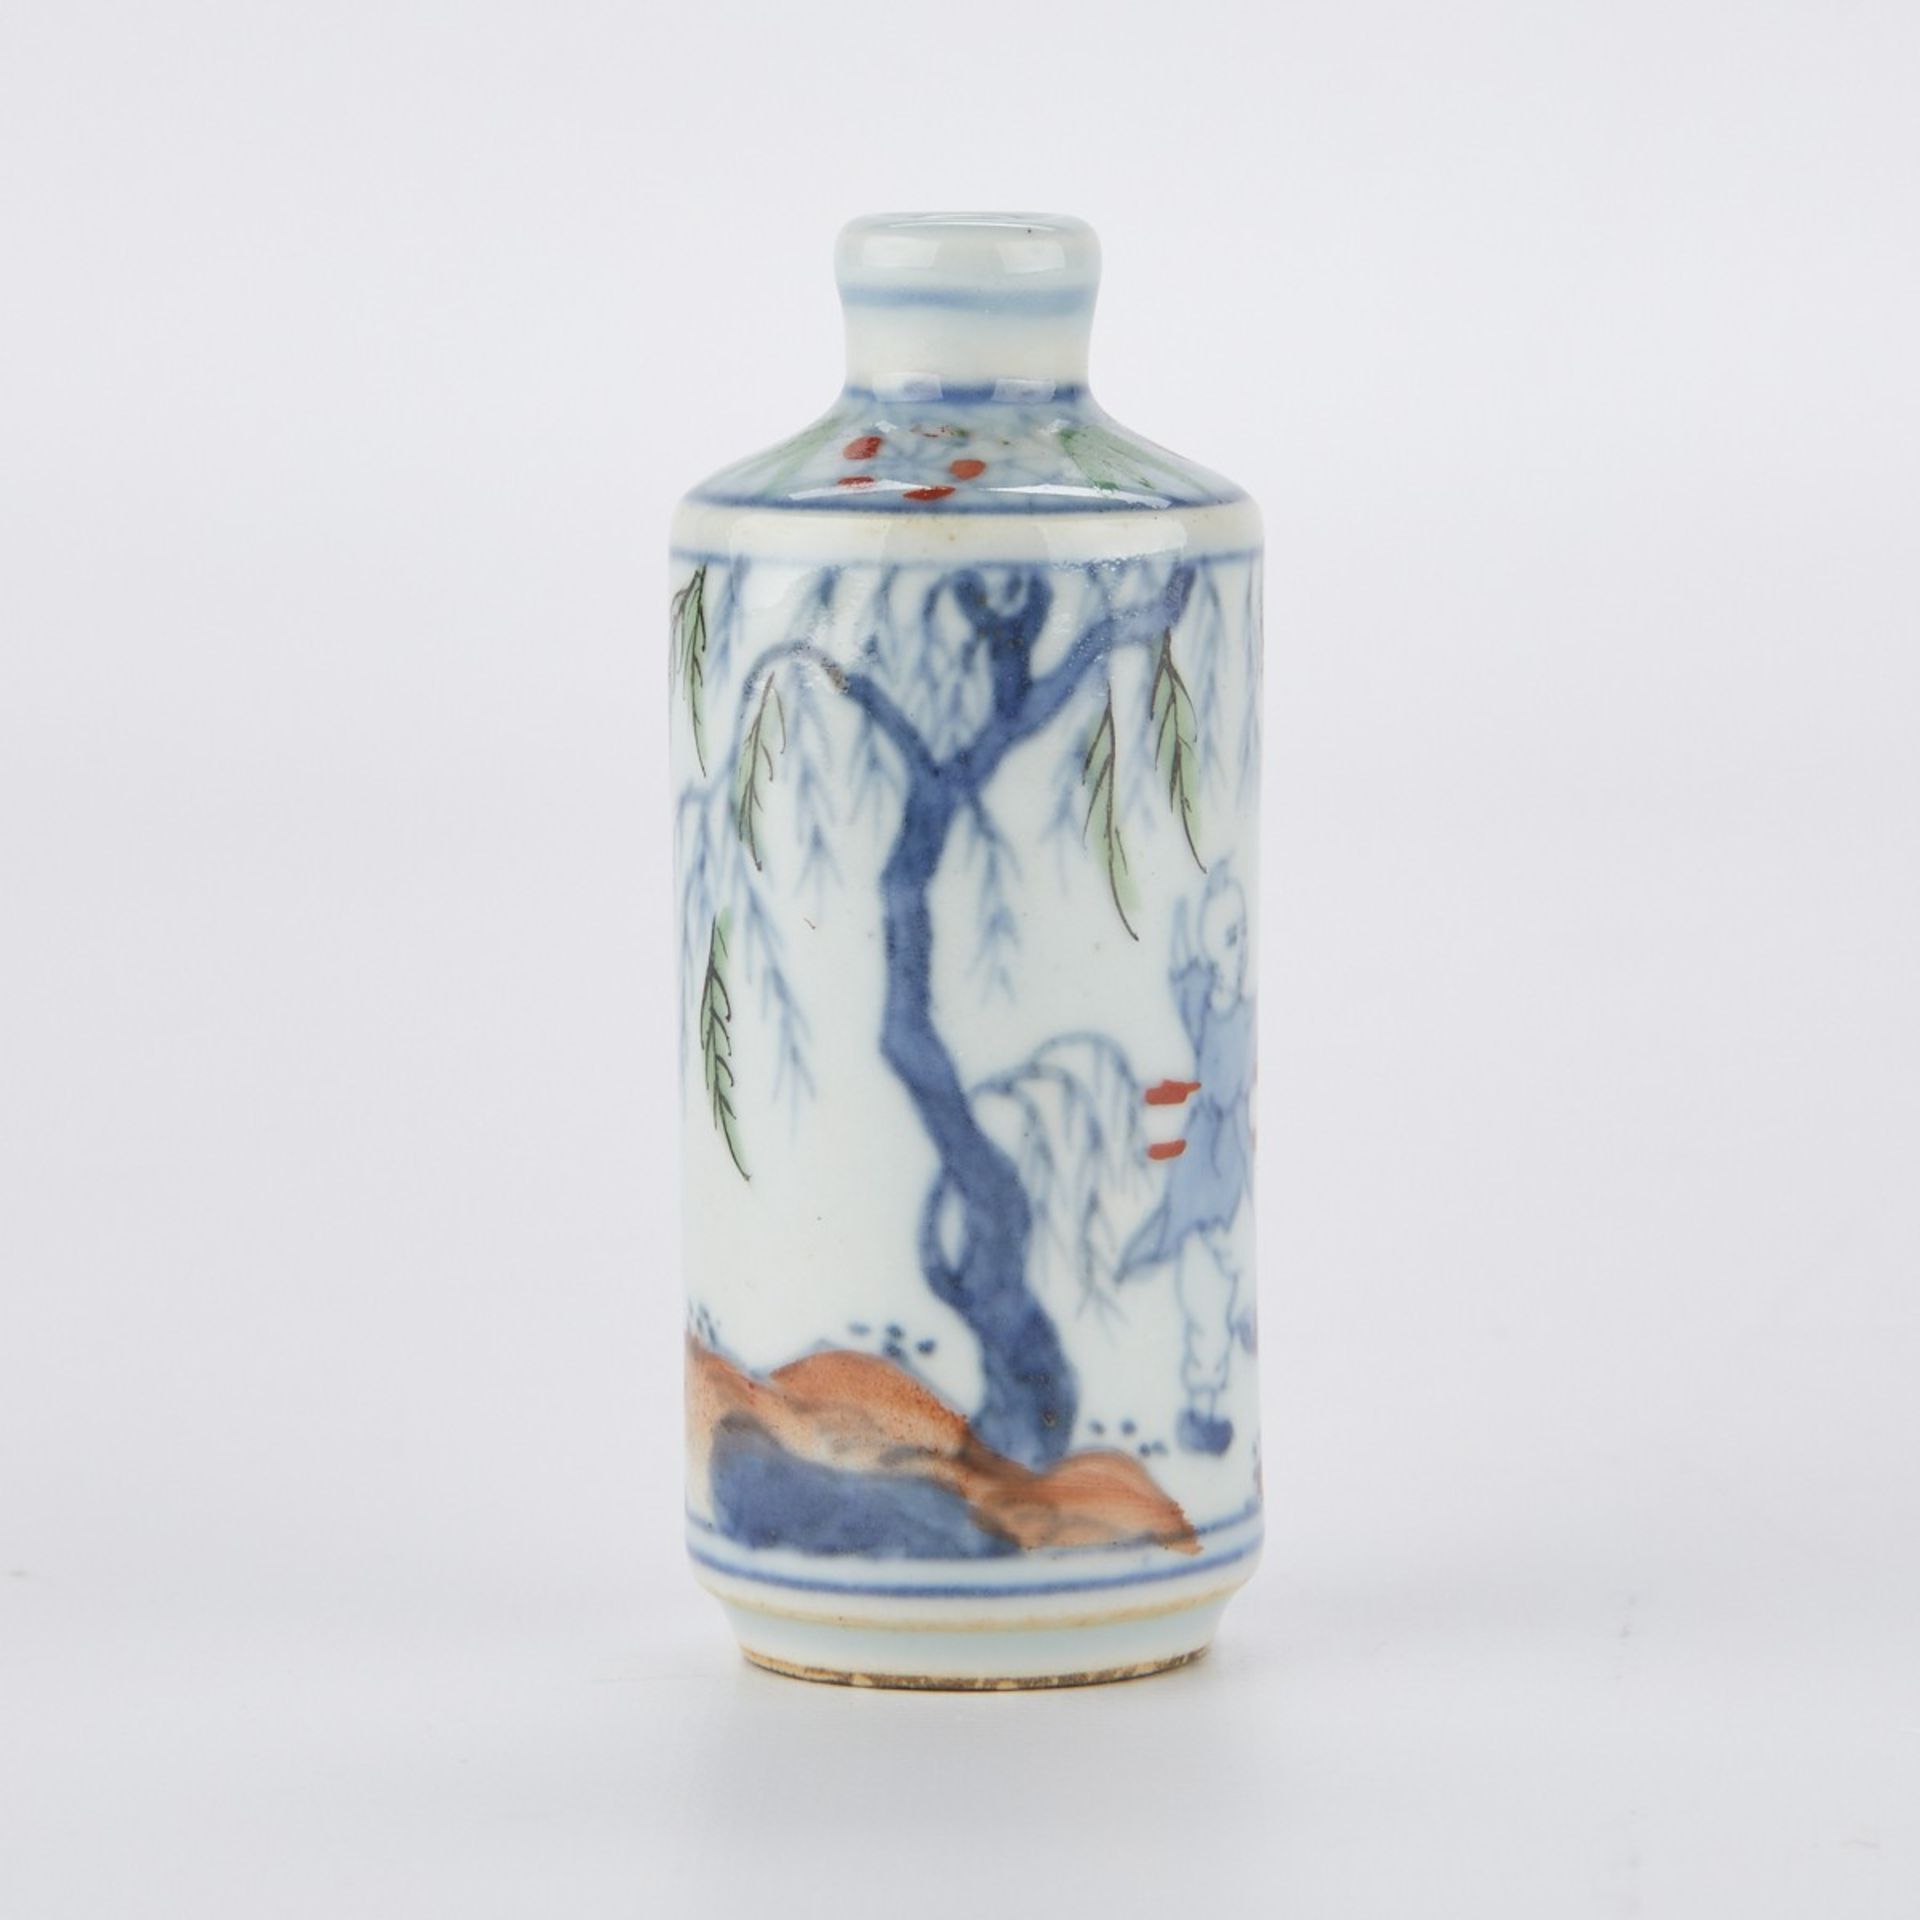 19th c. Chinese Doucai Porcelain Snuff Bottle - Image 4 of 6